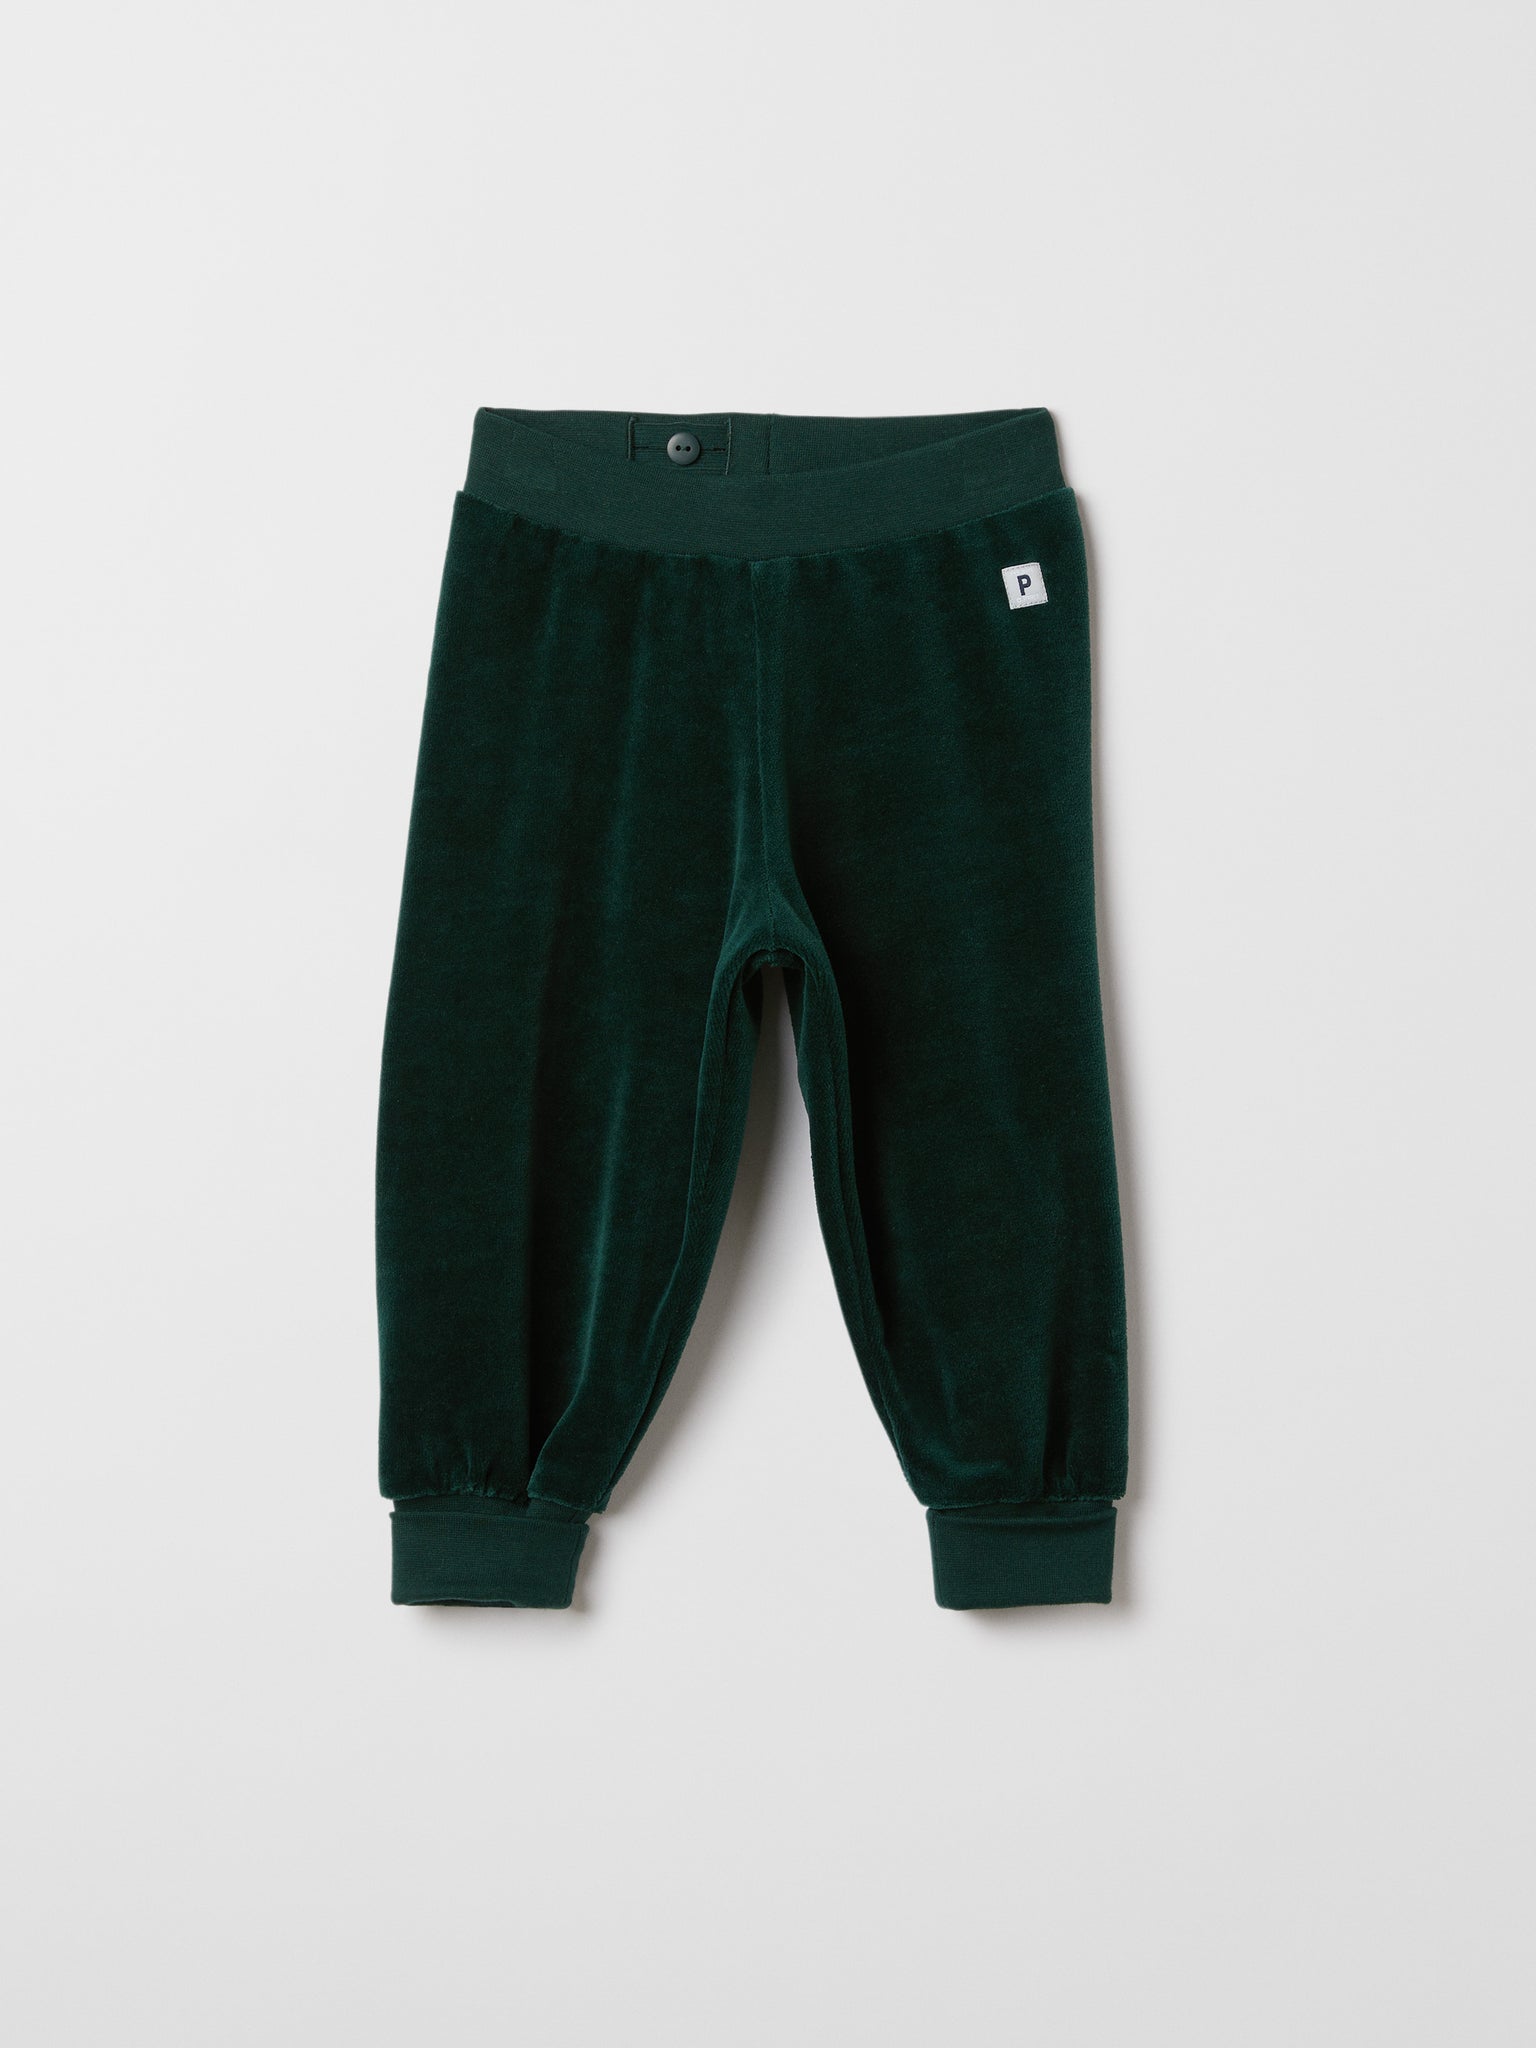 Green Velour Baby Trousers from the Polarn O. Pyret baby collection. Nordic baby clothes made from sustainable sources.